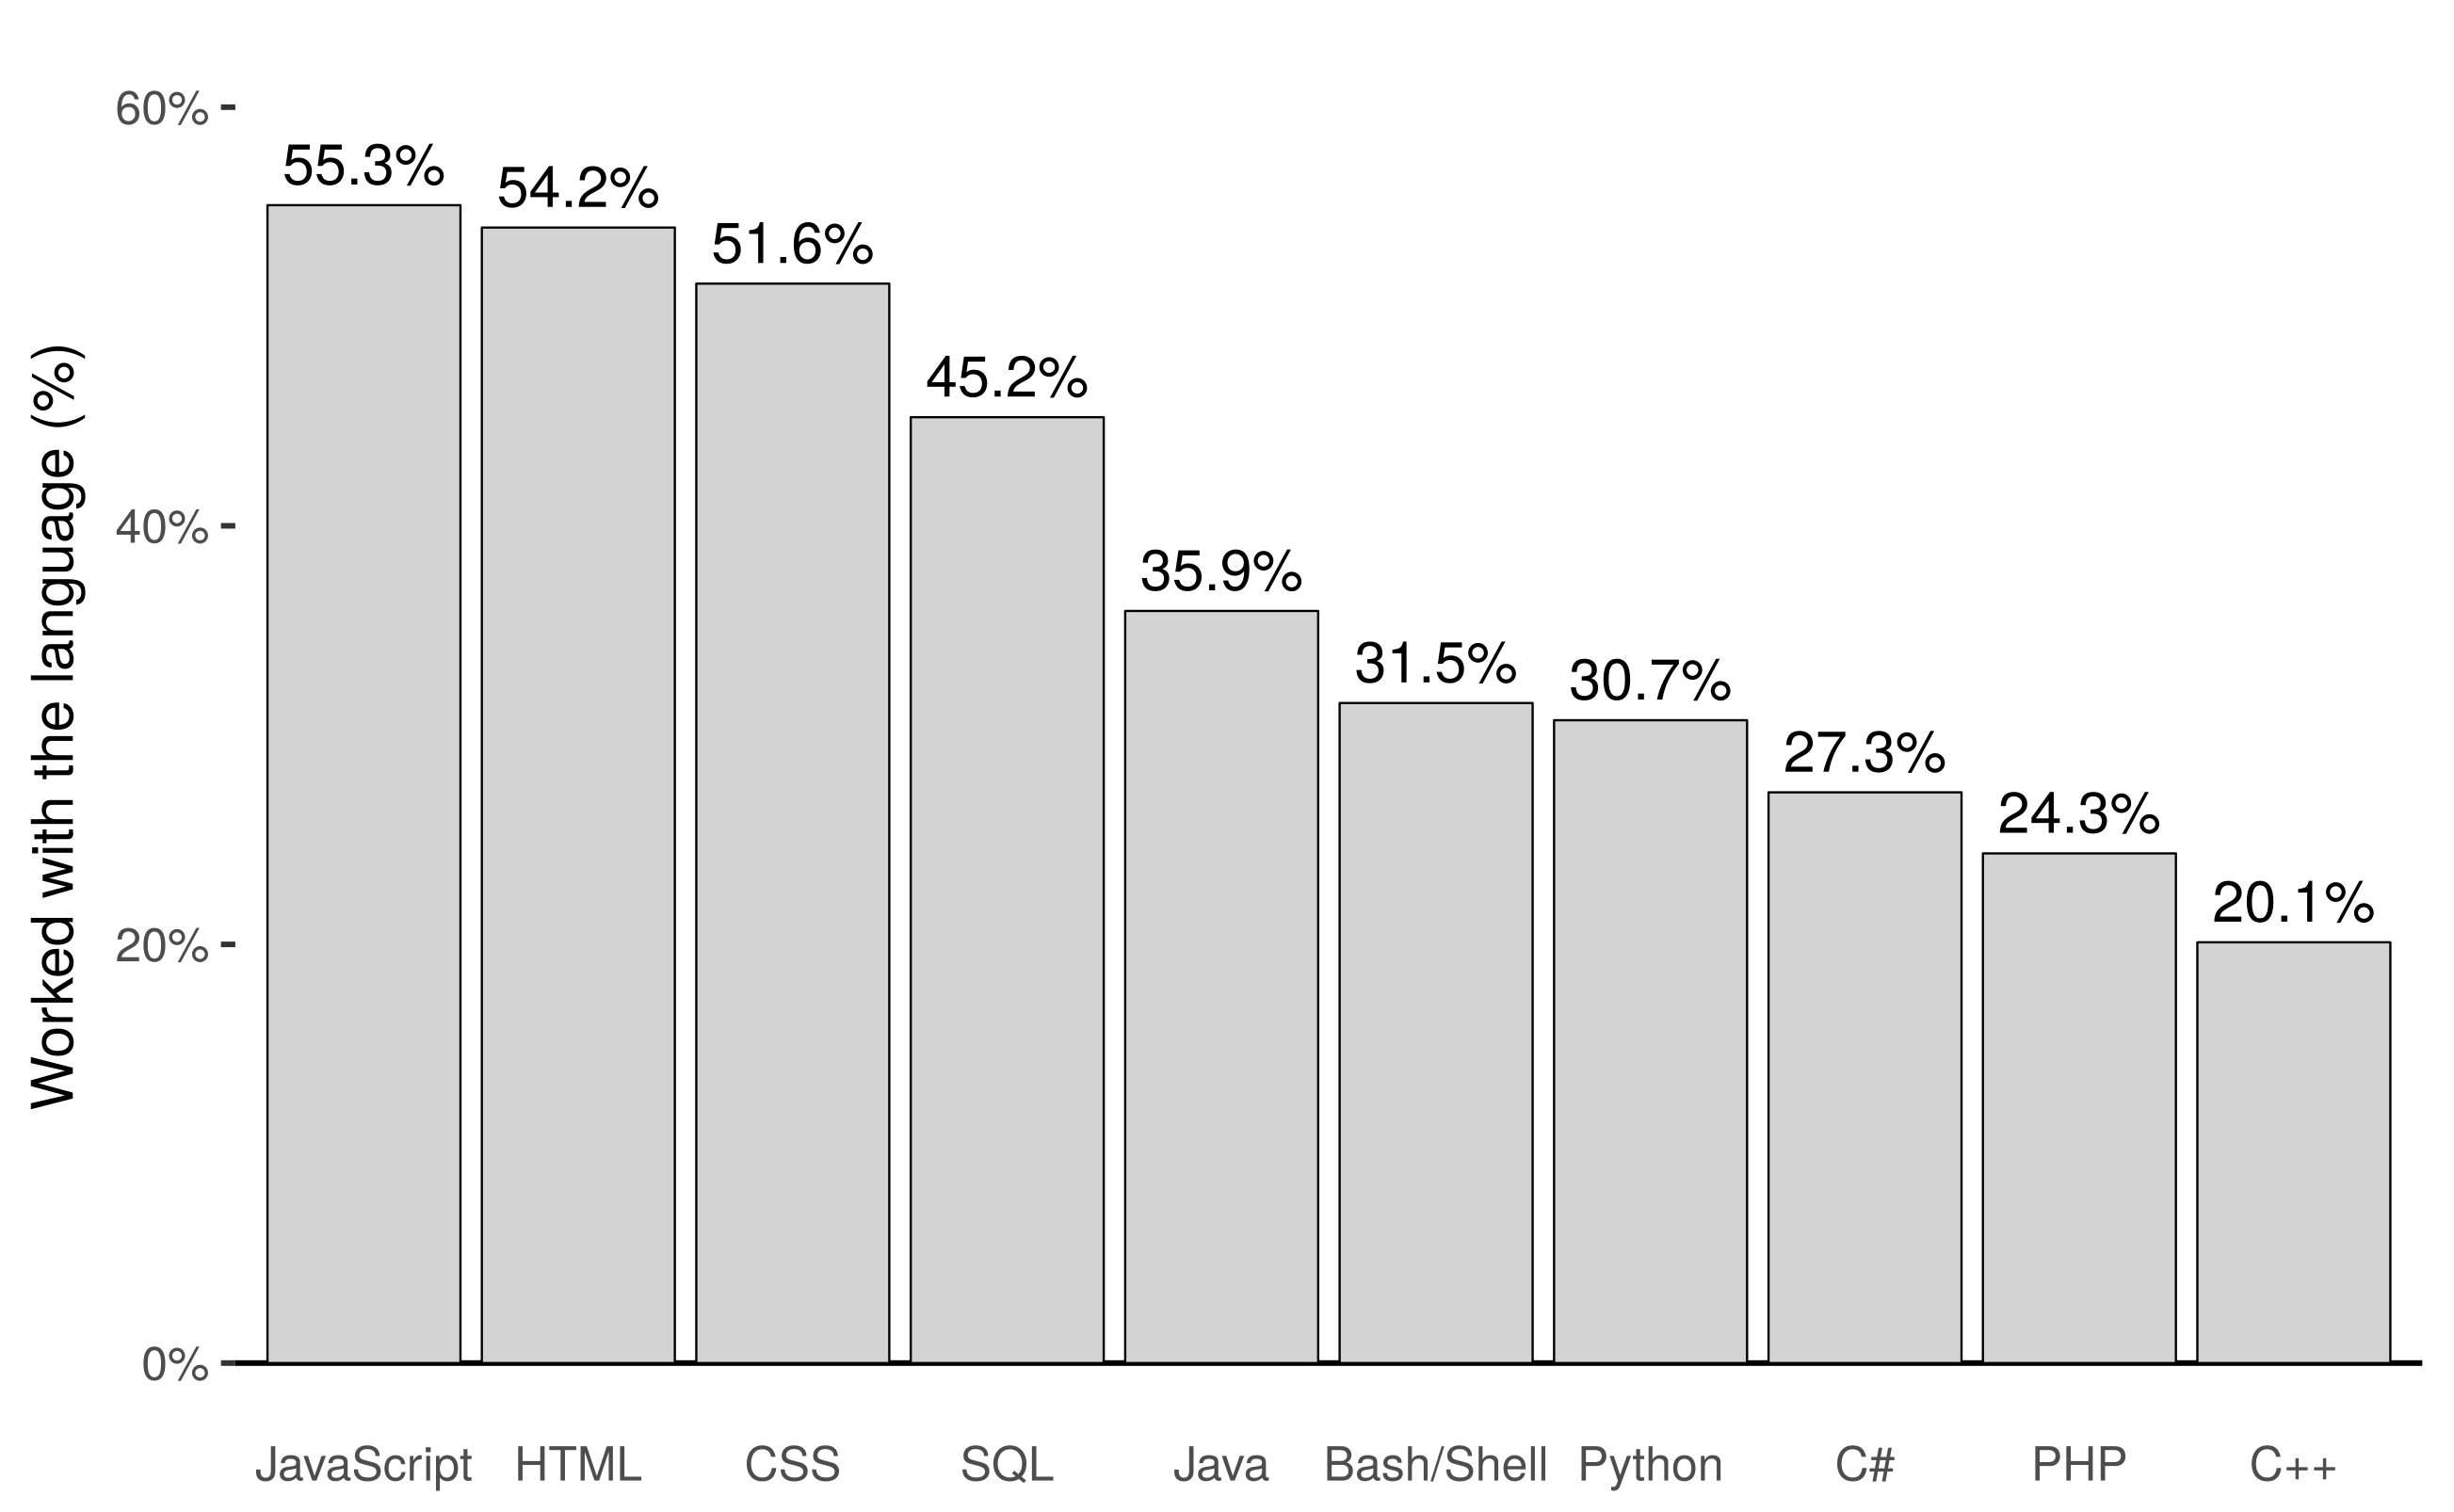 Programming language popularity, based on the StackOverflow survey for 2018